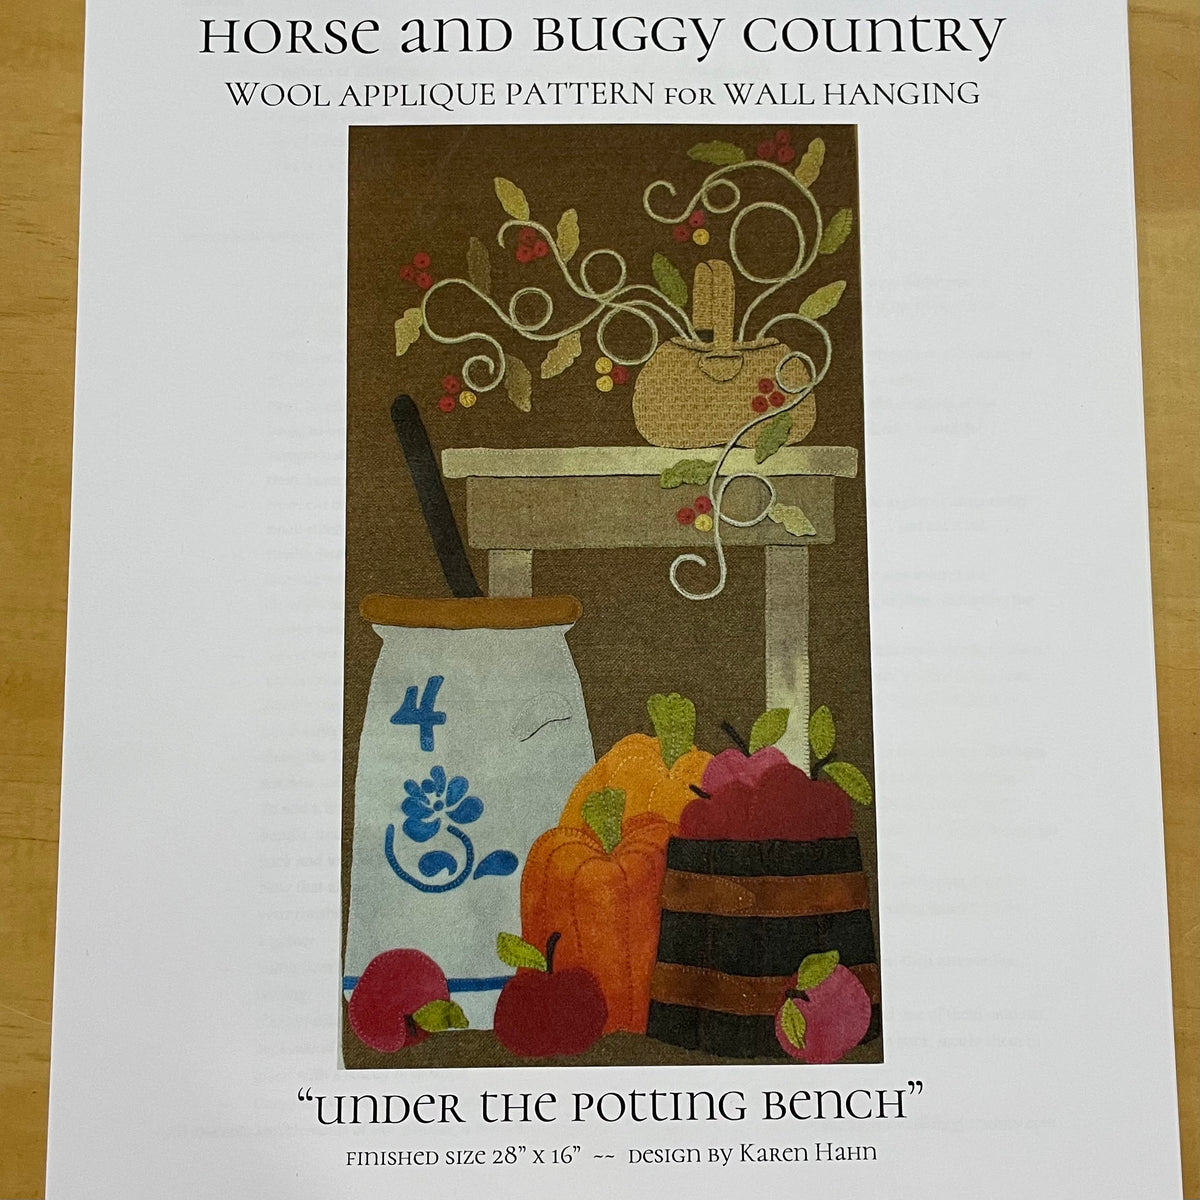 Under the Potting Bench - Horse and Buggy Country Wool Applique Pattern